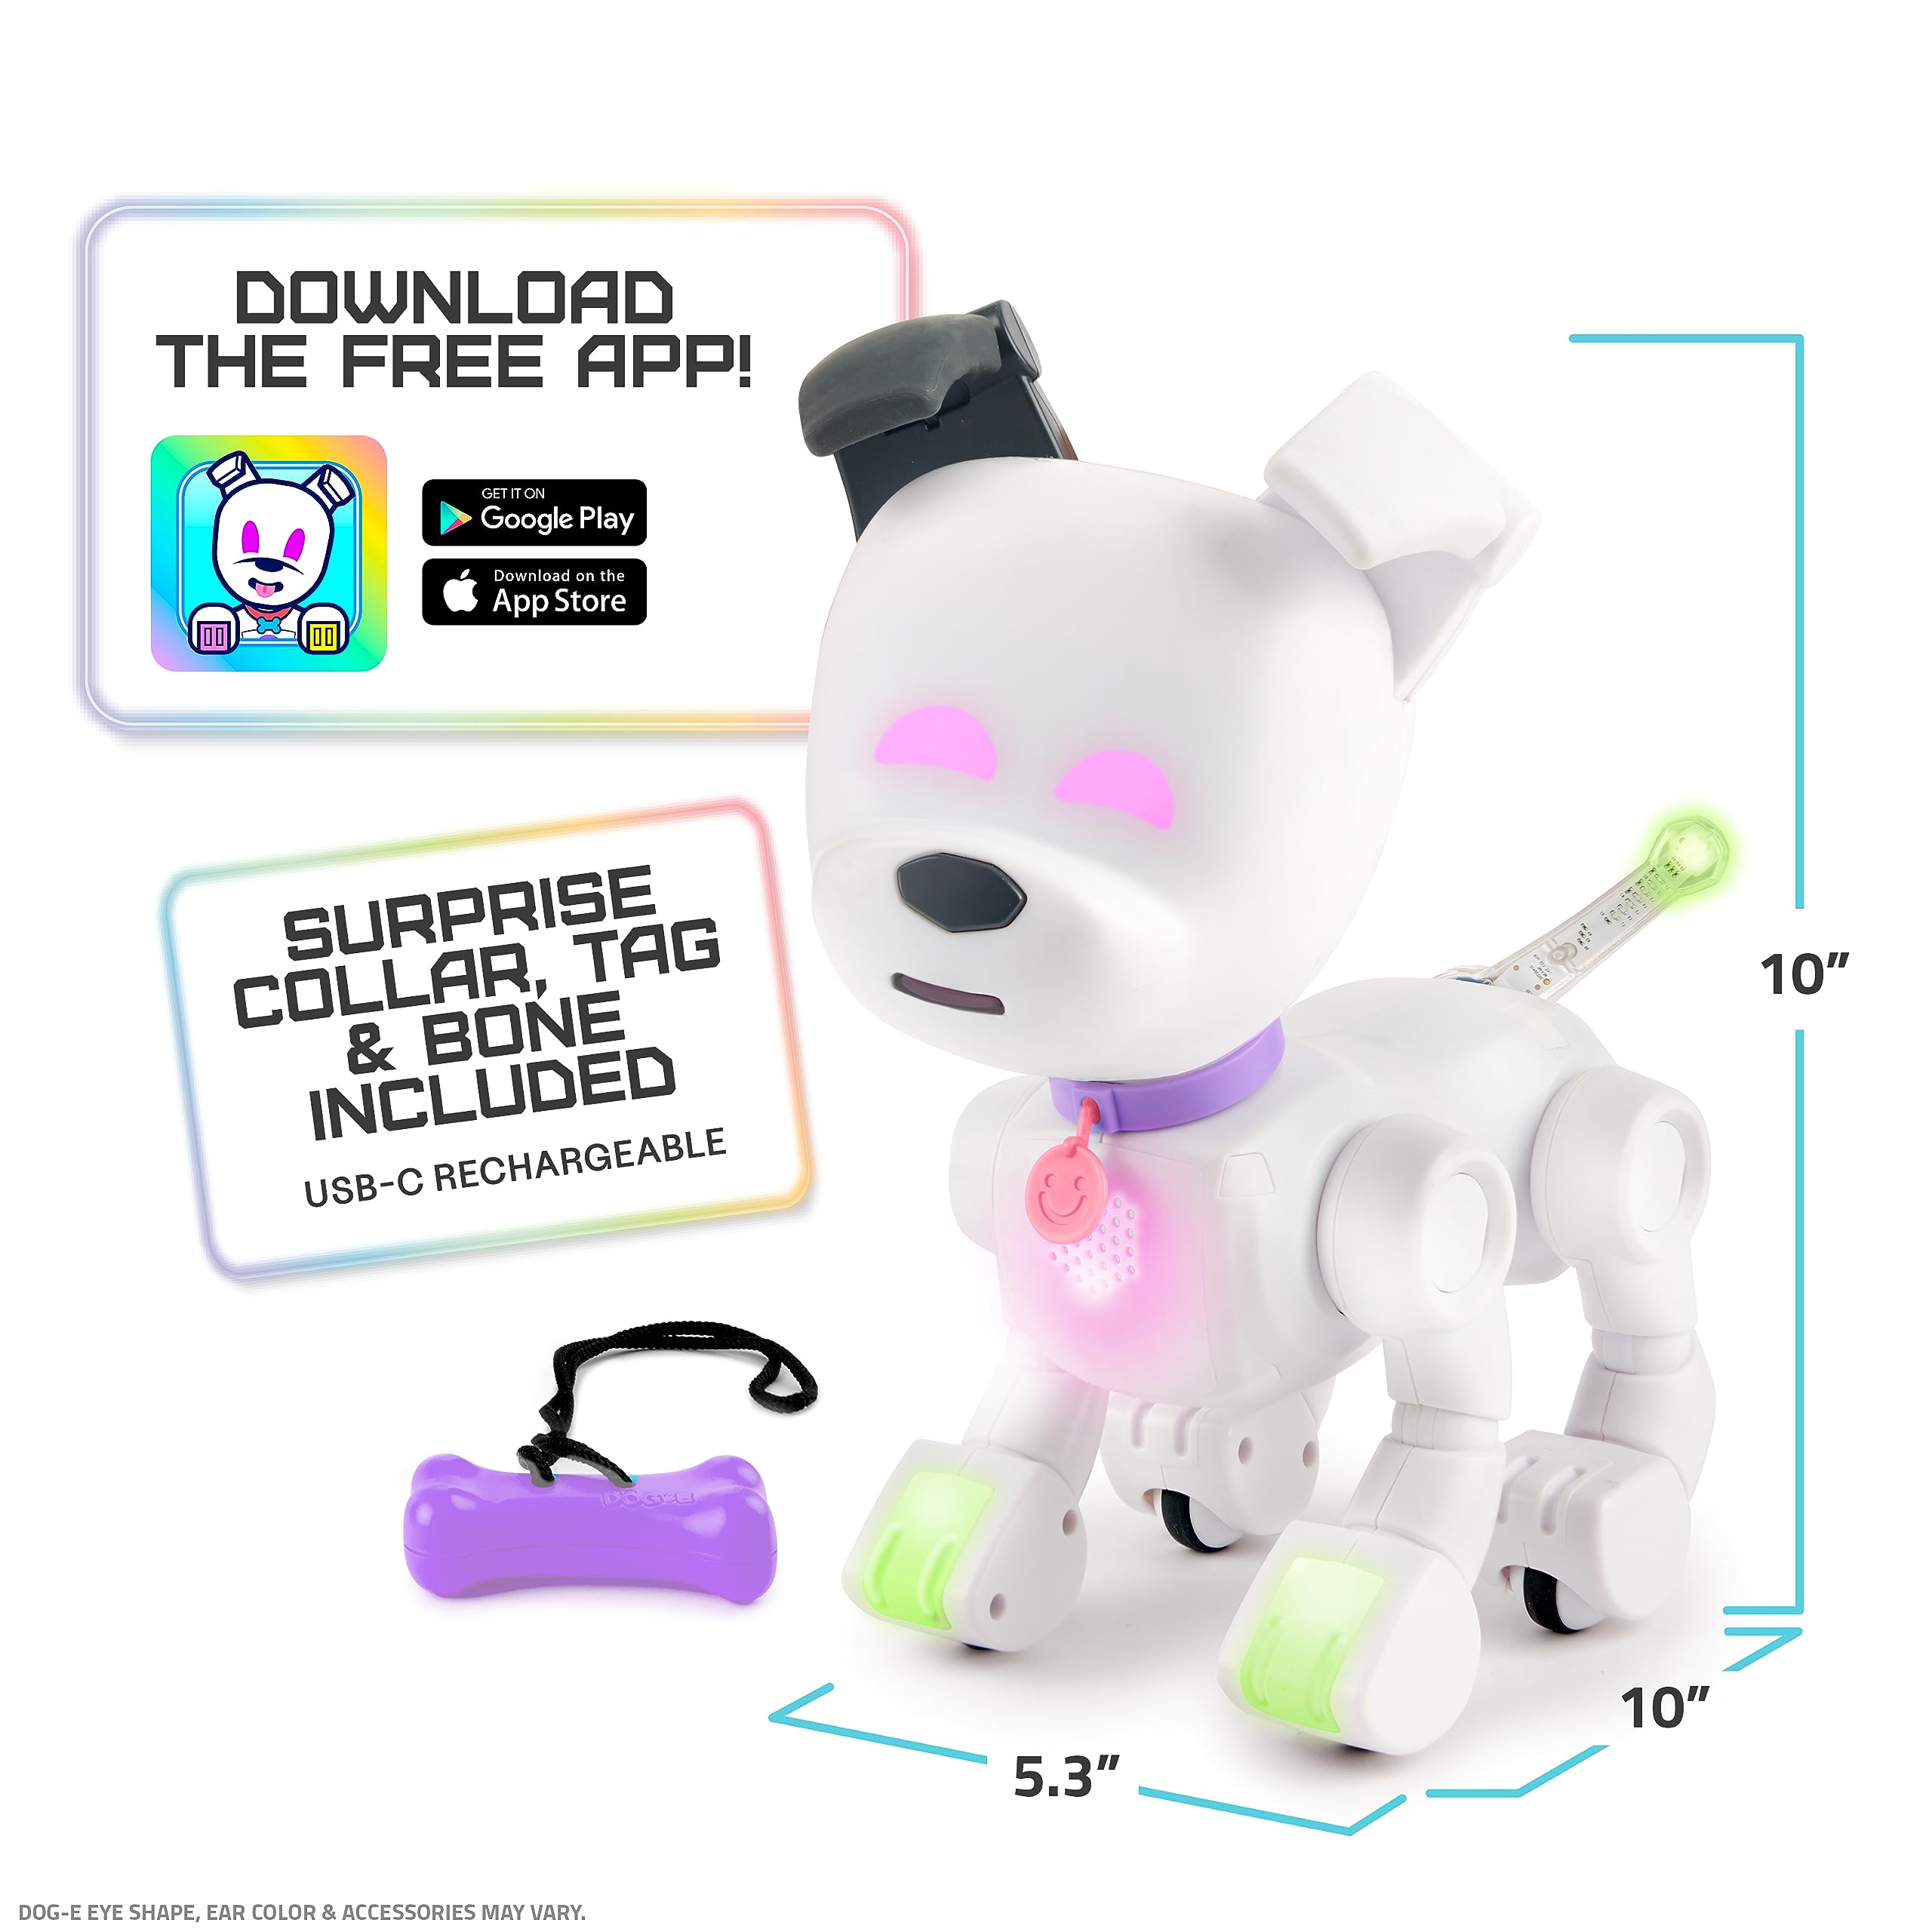 DOG-E by MINTiD Interactive Robot Dog with Colorful LED Lights, 200+ Sounds & Reactions, App Connected (Ages 6+)